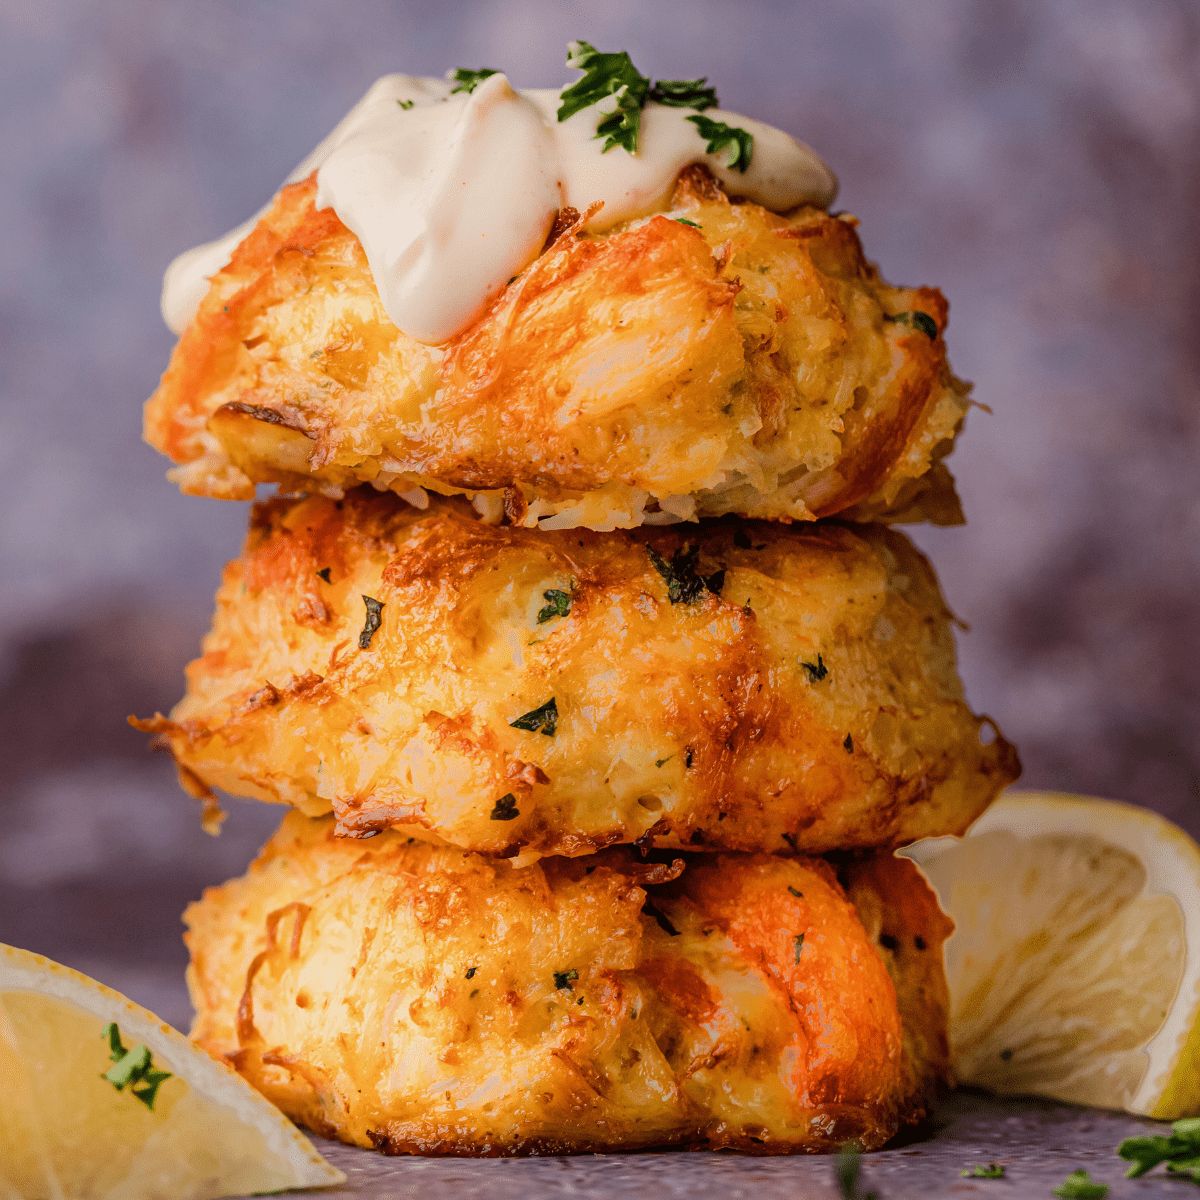 A pile of scrumptious low-carb maryland crab cakes.